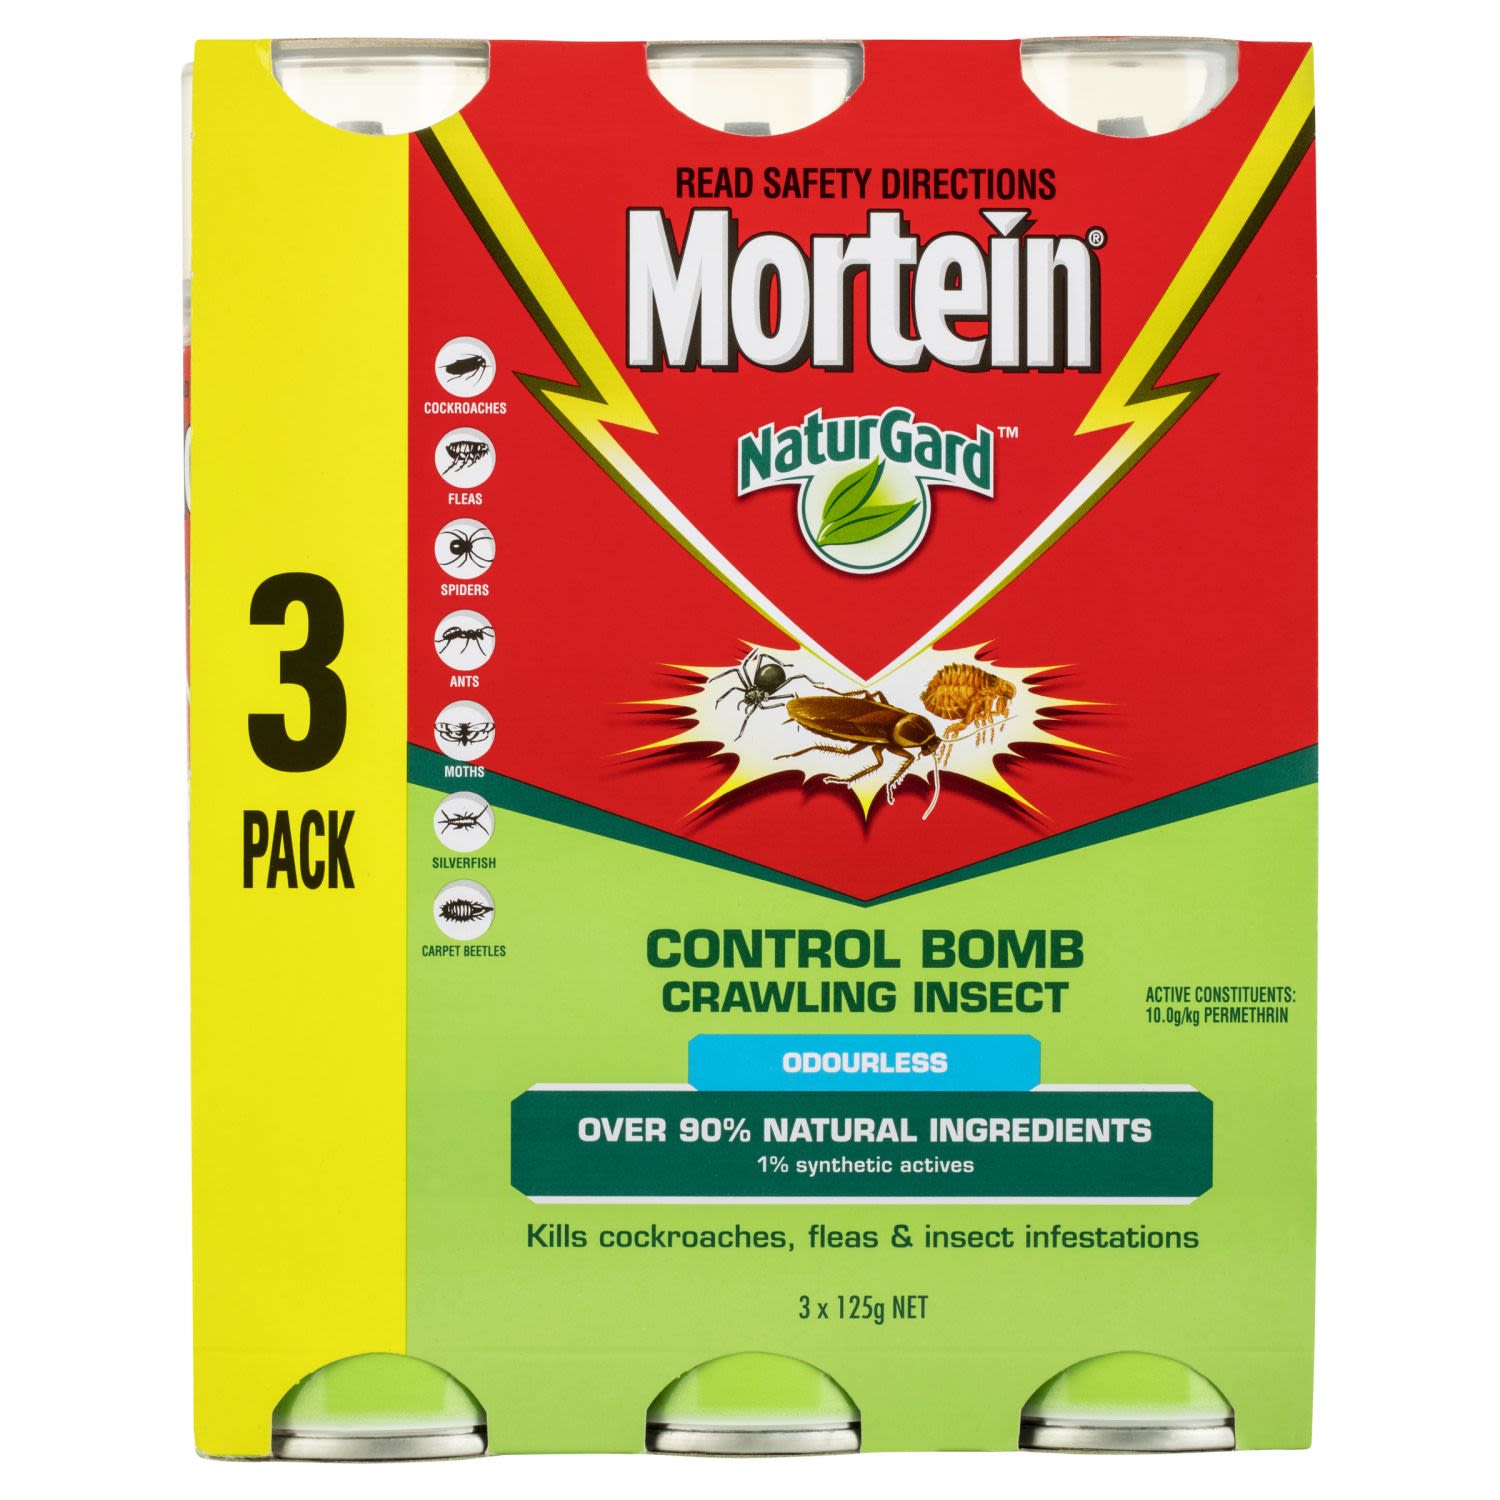 Mortein NaturGard Control Bomb Odourless Crawling Insect Killer, 3 Each